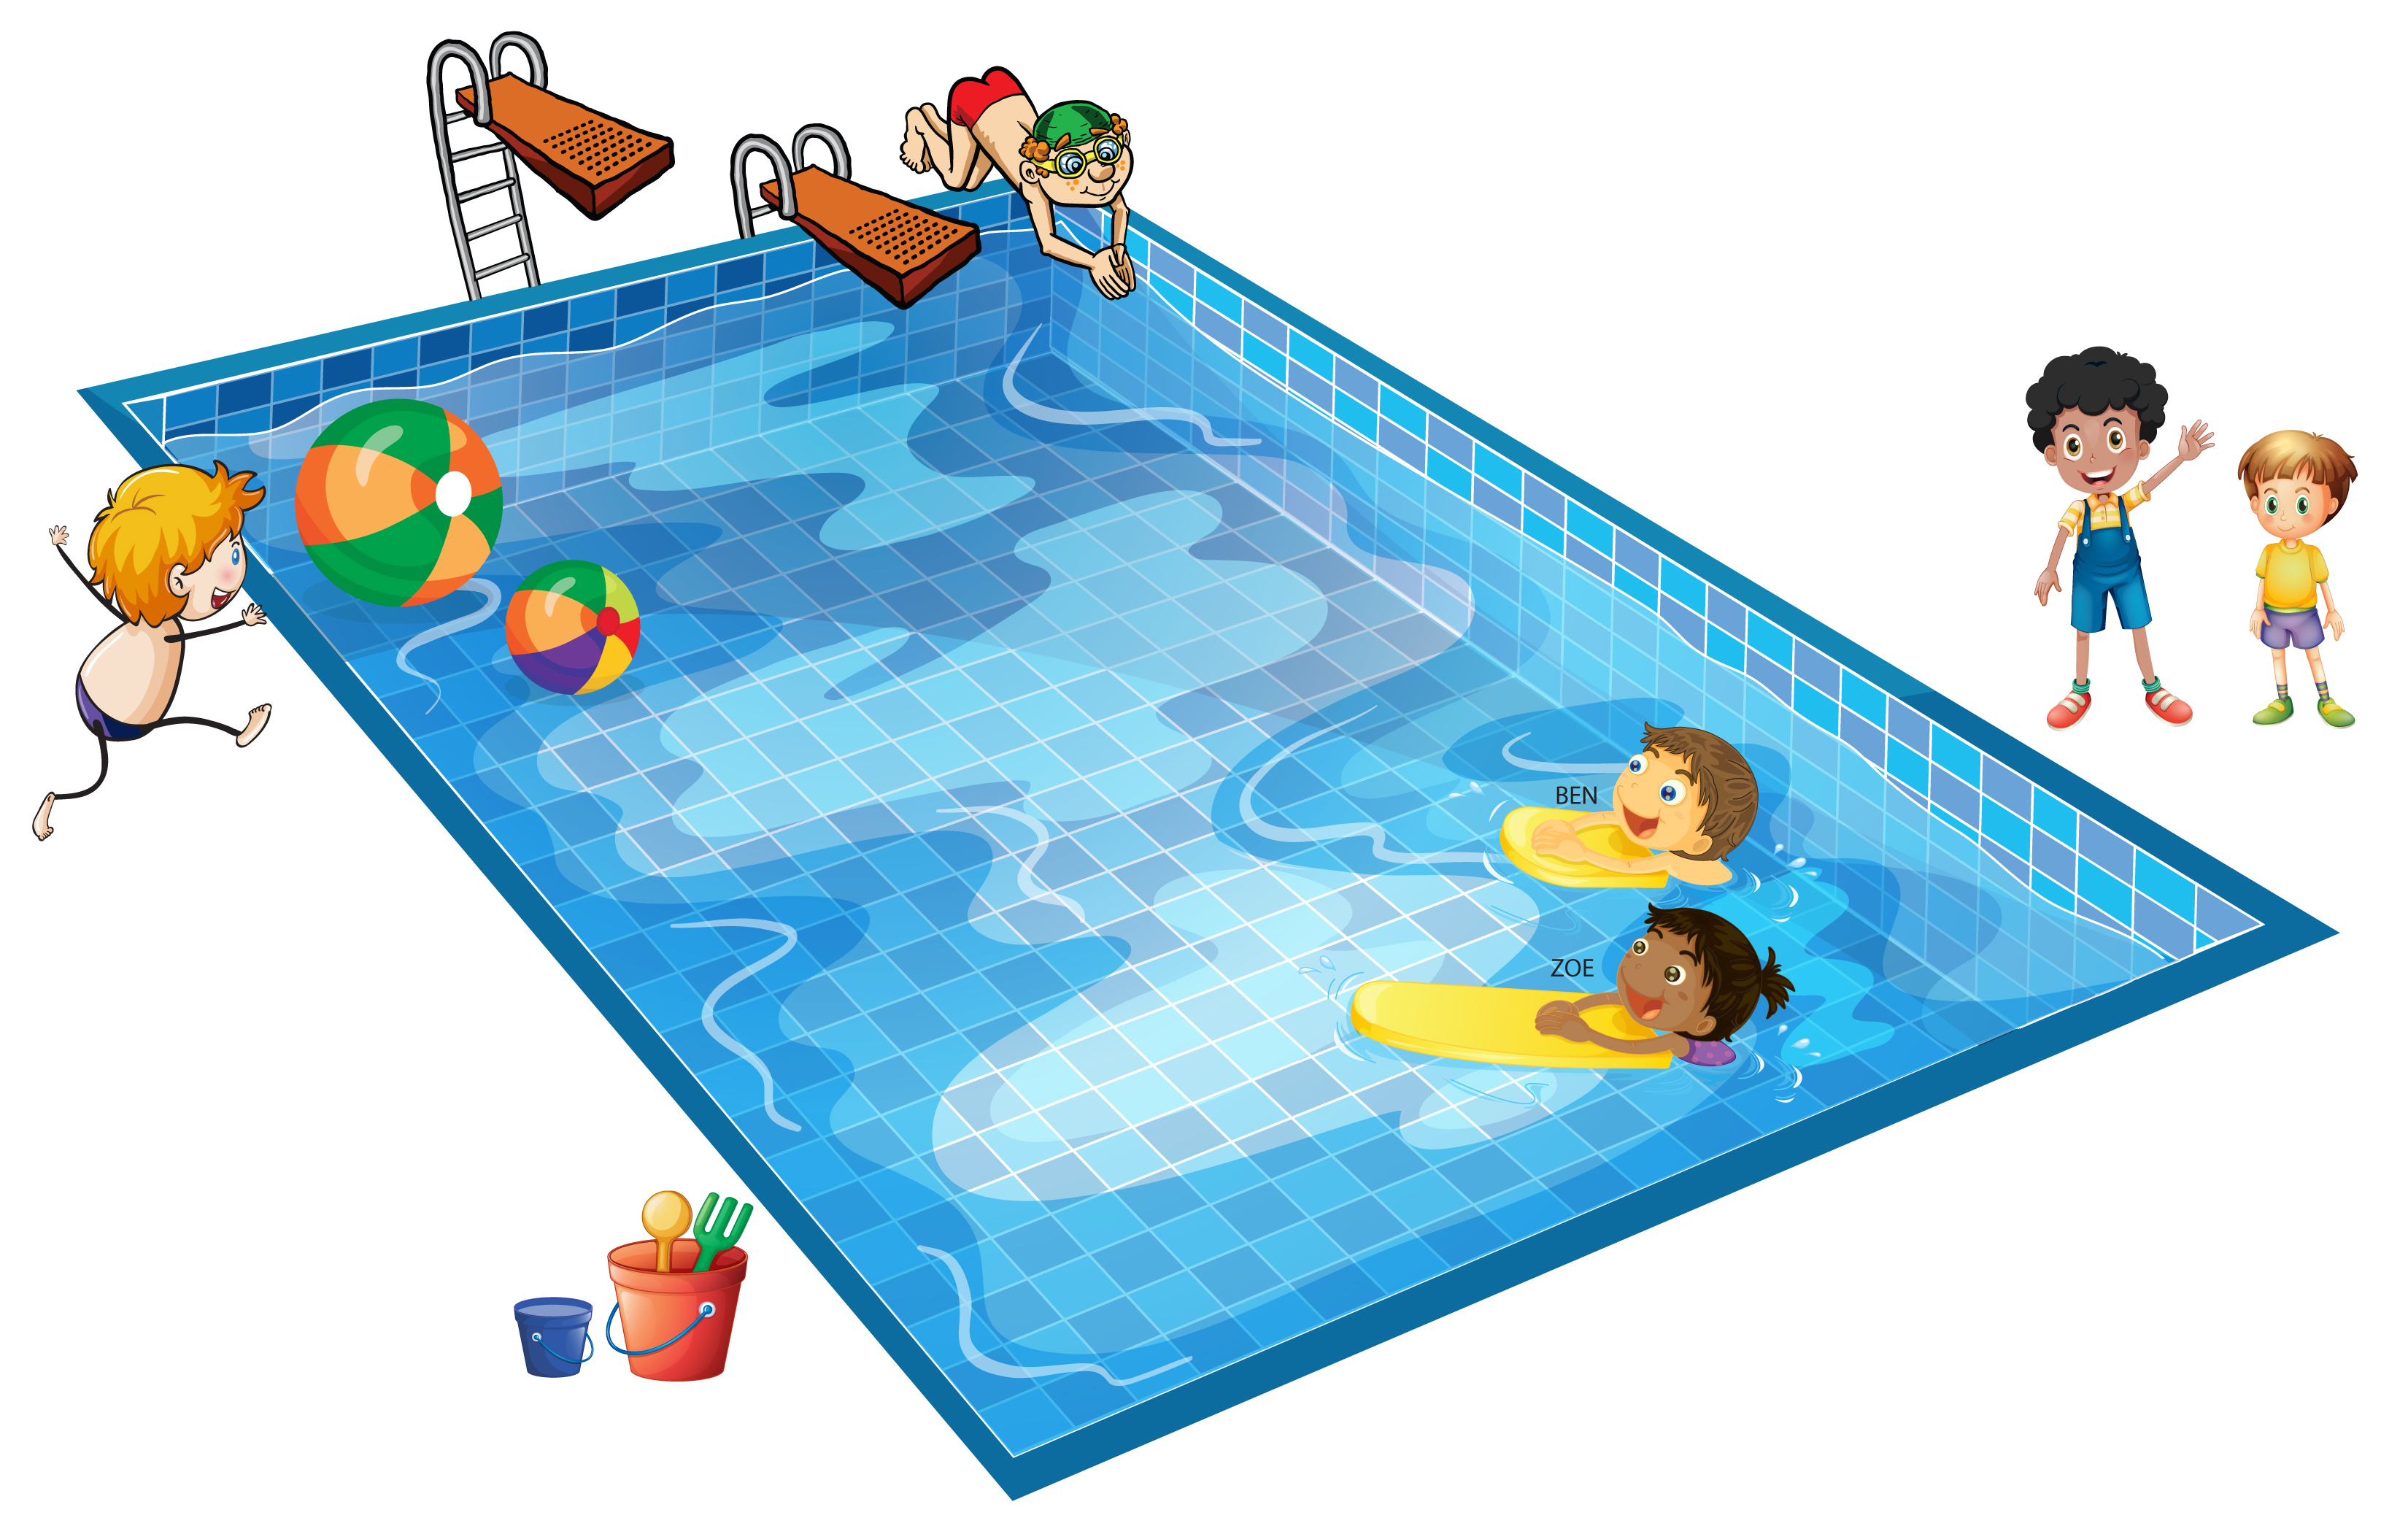 free clipart images pool party - photo #39